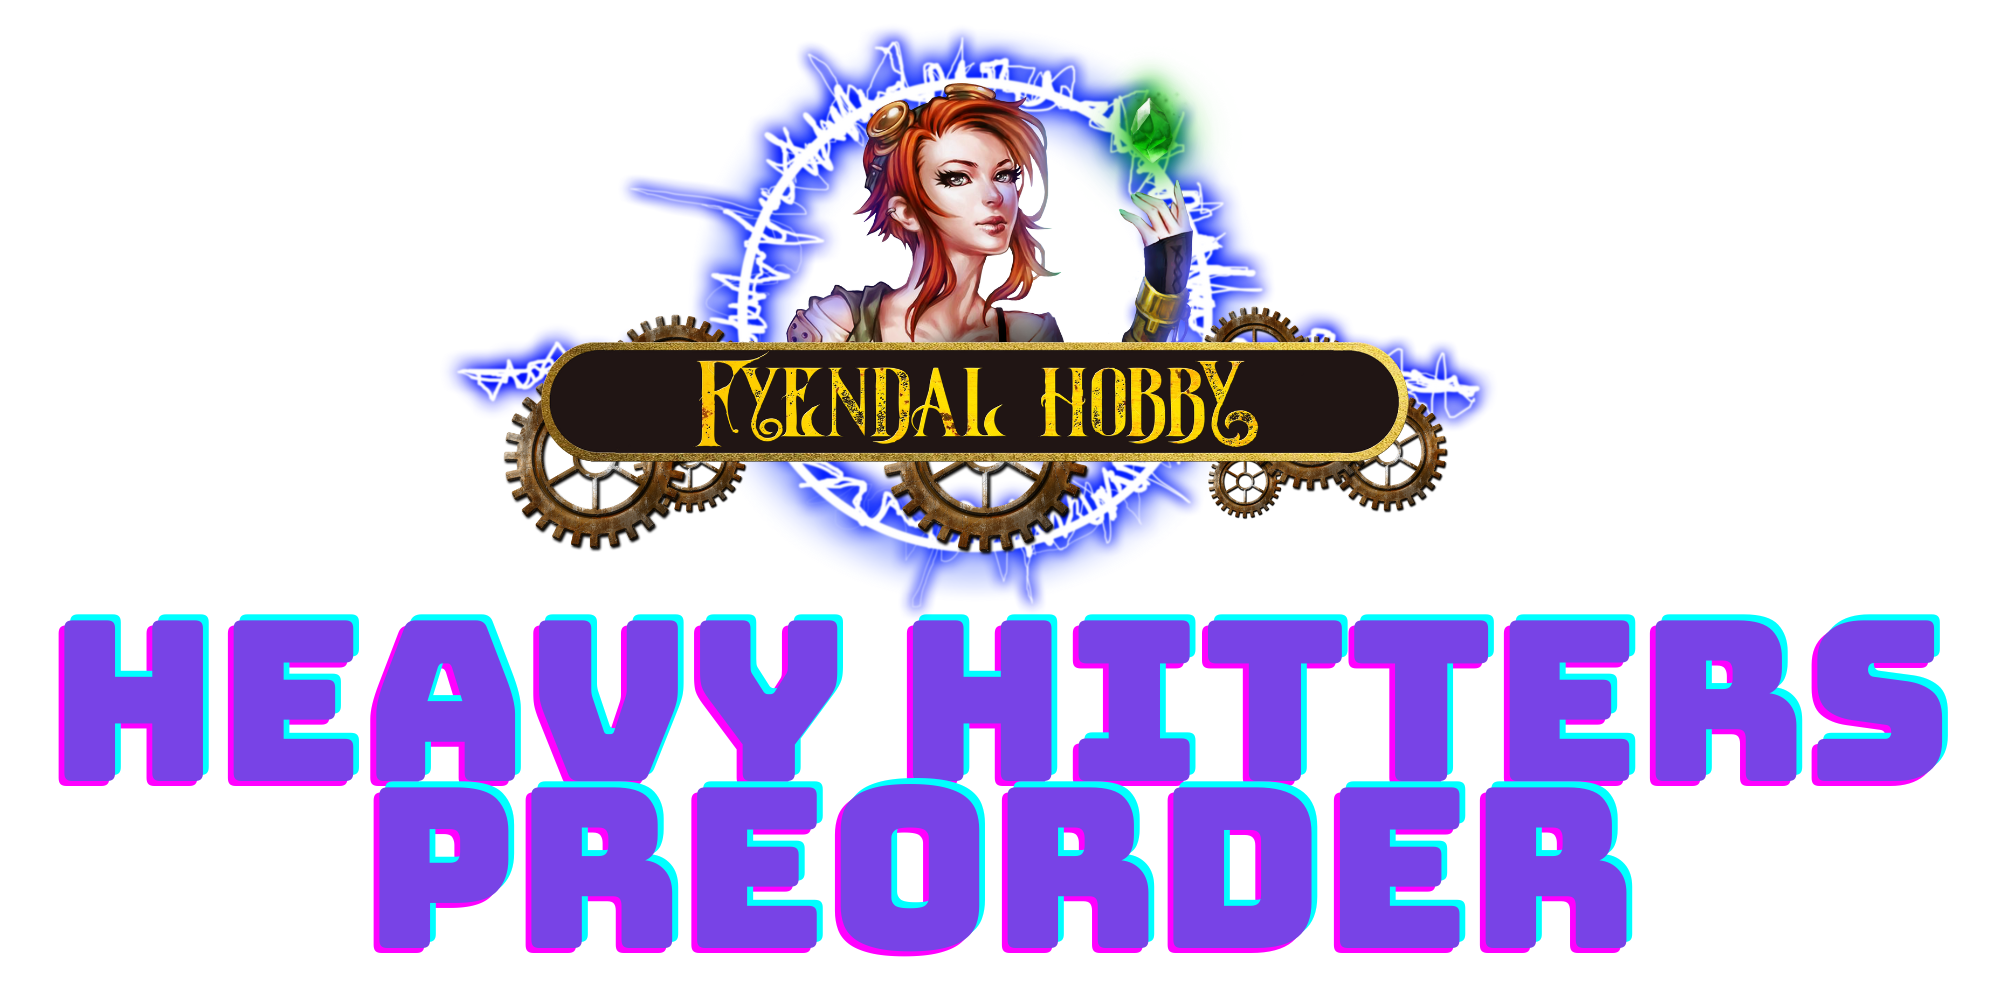 Heavy Hitters Preorder